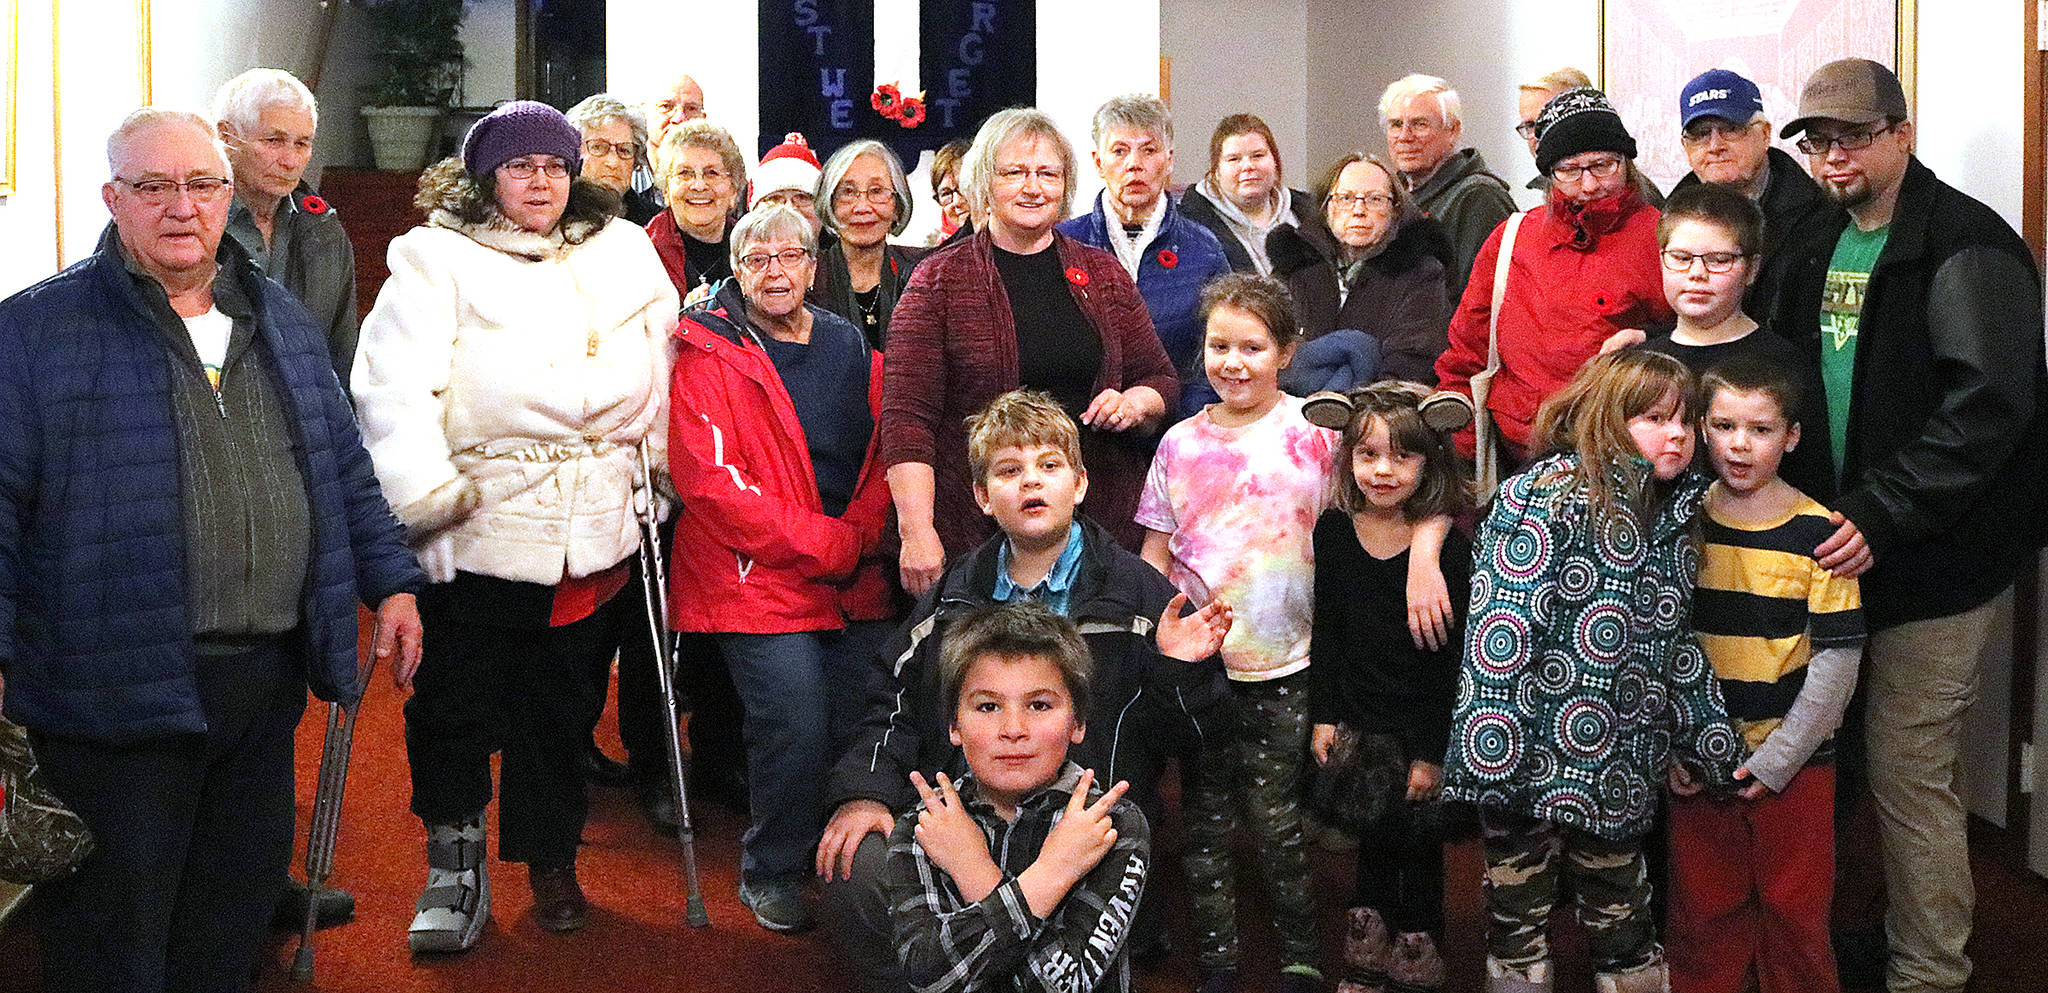 Twenty-seven Castor residents came together at the Knox United Church to take part in the “Bells of Peace,” ringing the church bell 100 times to commemorate a century since the guns fell silent at the end of the First World War. The end of the war was celebrated in 1918 by churches all over Europe ringing their bells to signify the end of hostilities. Kevin J Sabo photo